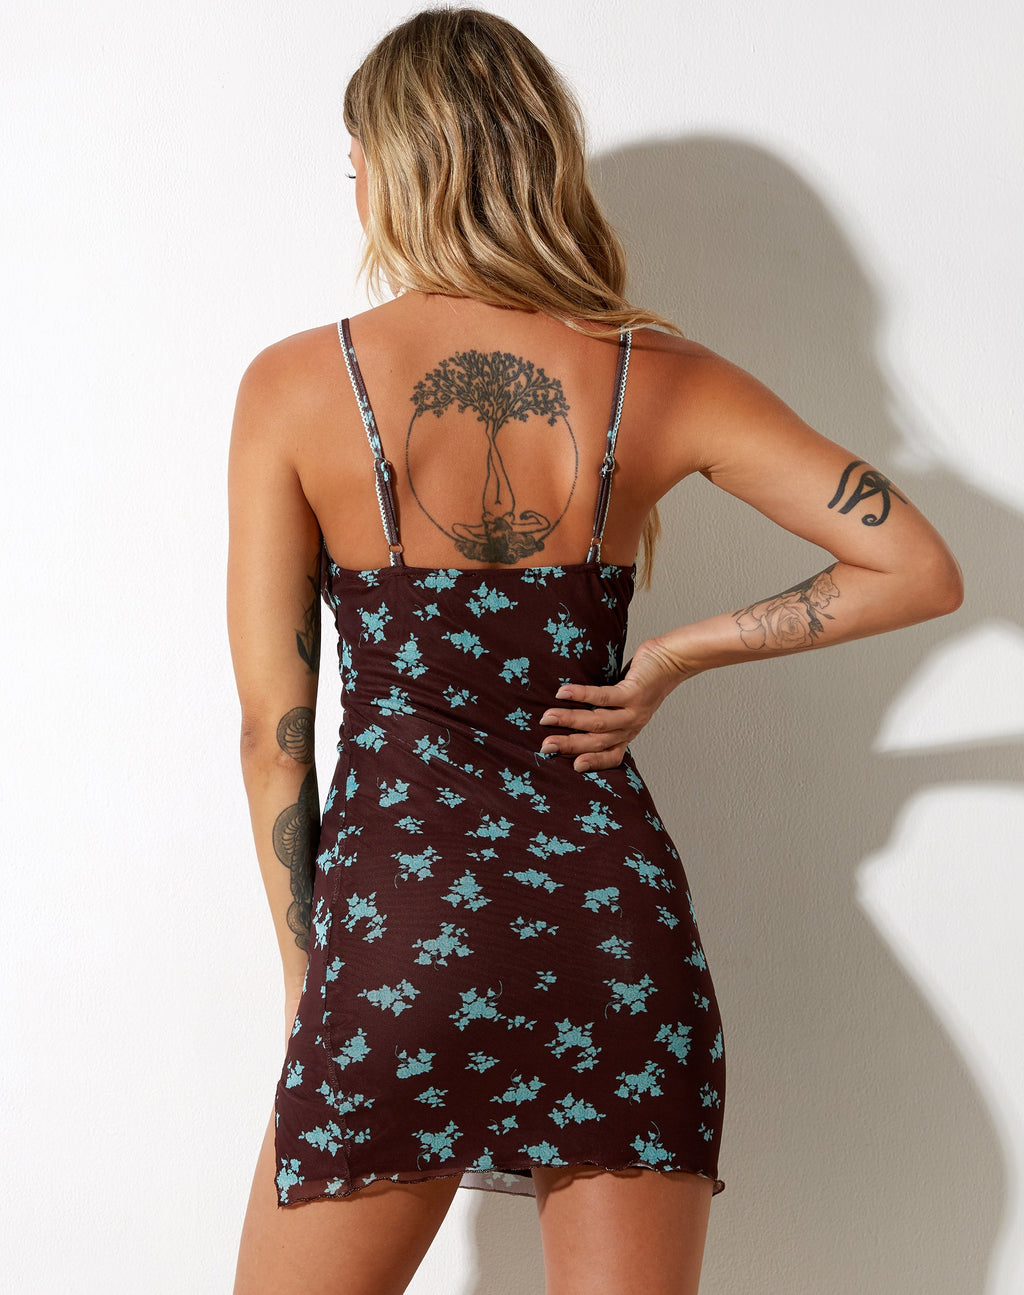 Yakinta Mini Dress in Femme Floral Blue and Brown